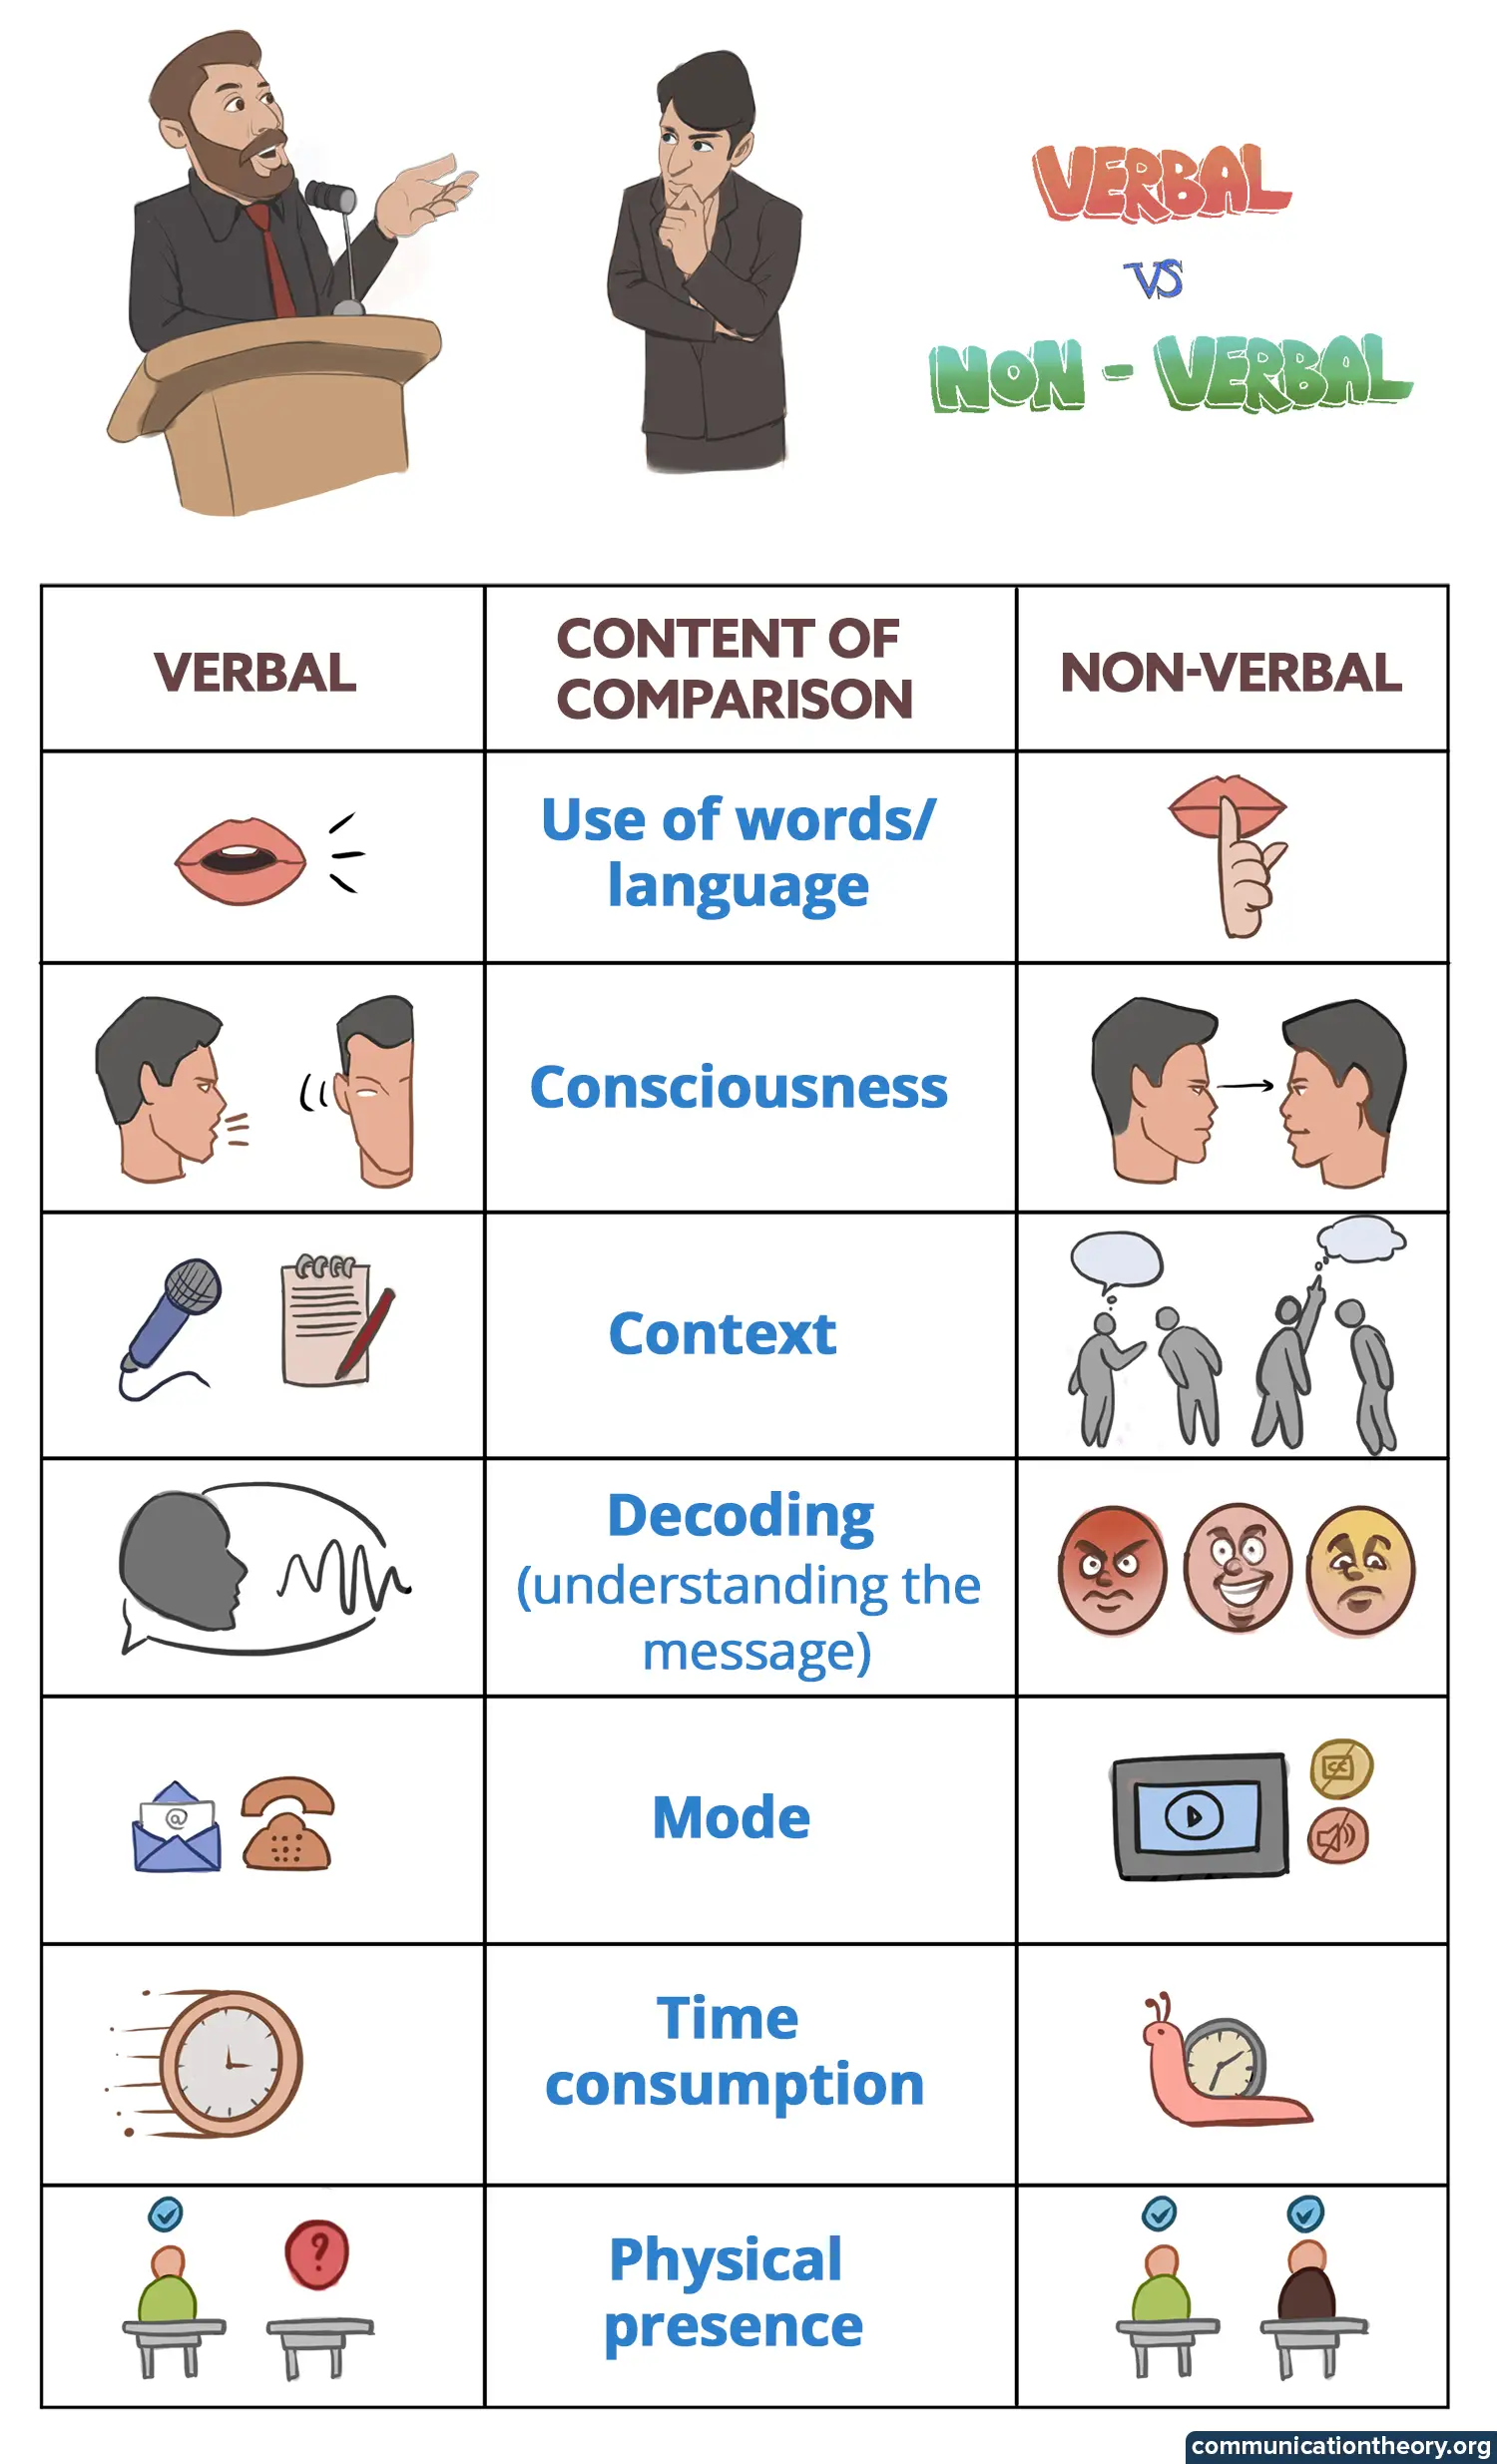 Verbal Vs Non-Verbal Communication With Examples